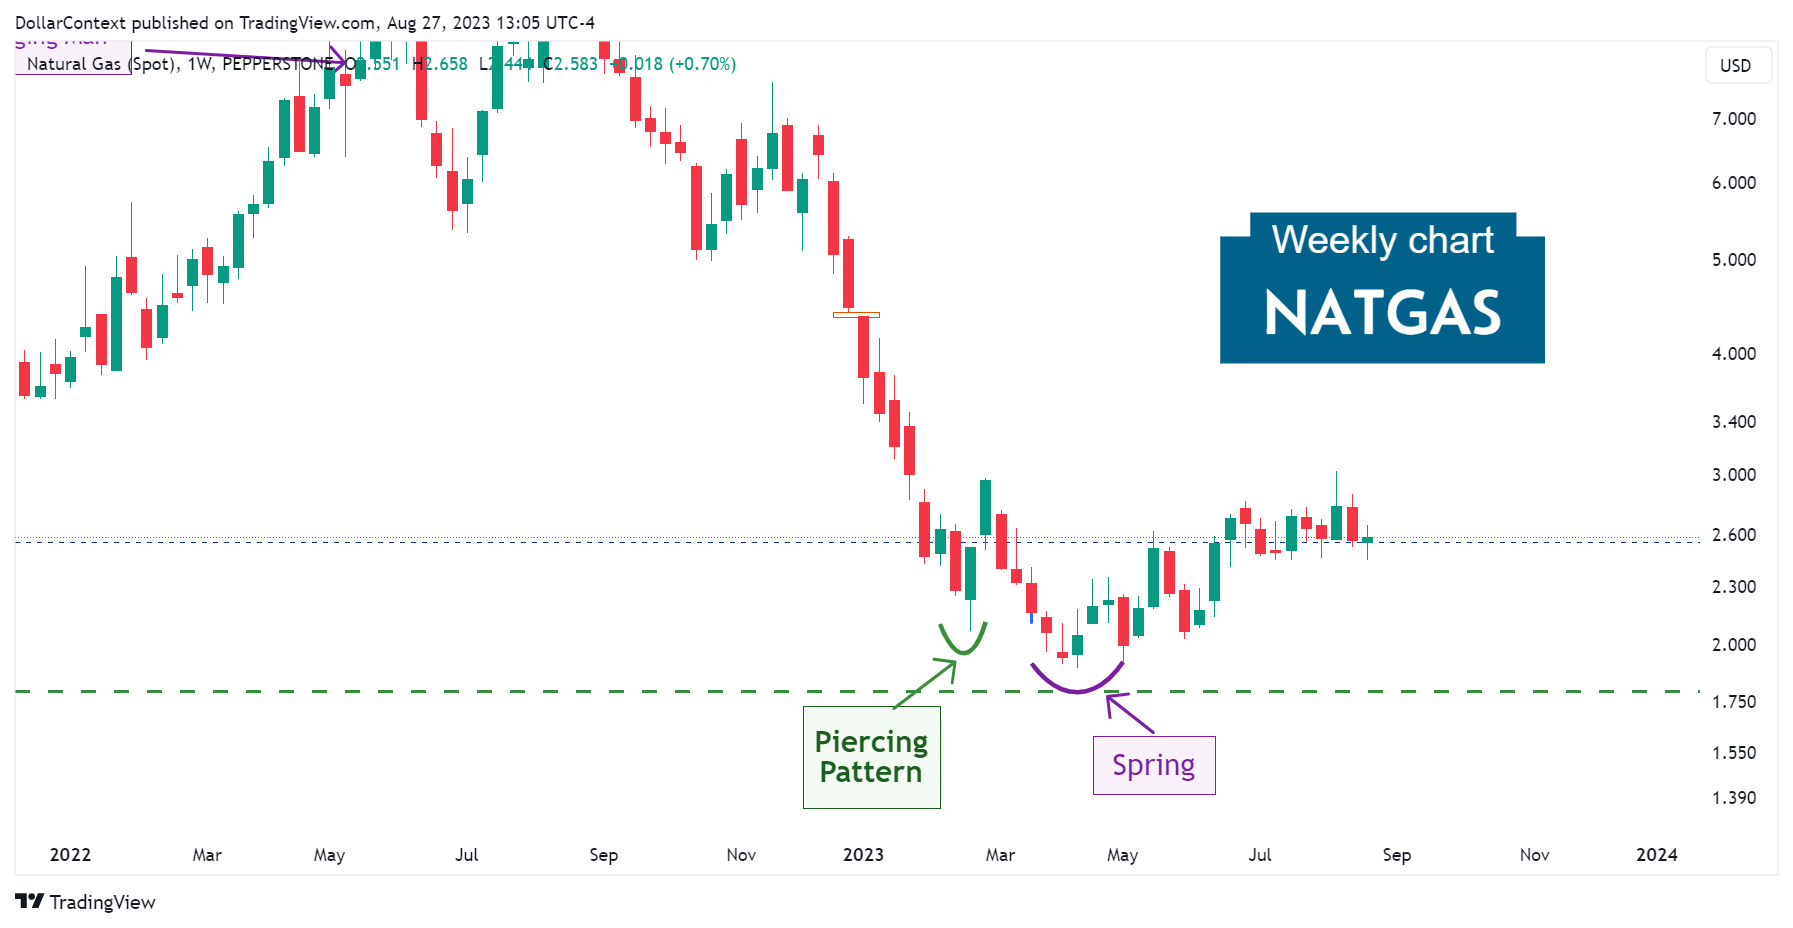 Natural Gas Spot: Piercing Pattern Followed by a Spring. February–April 2023 (Weekly Chart)